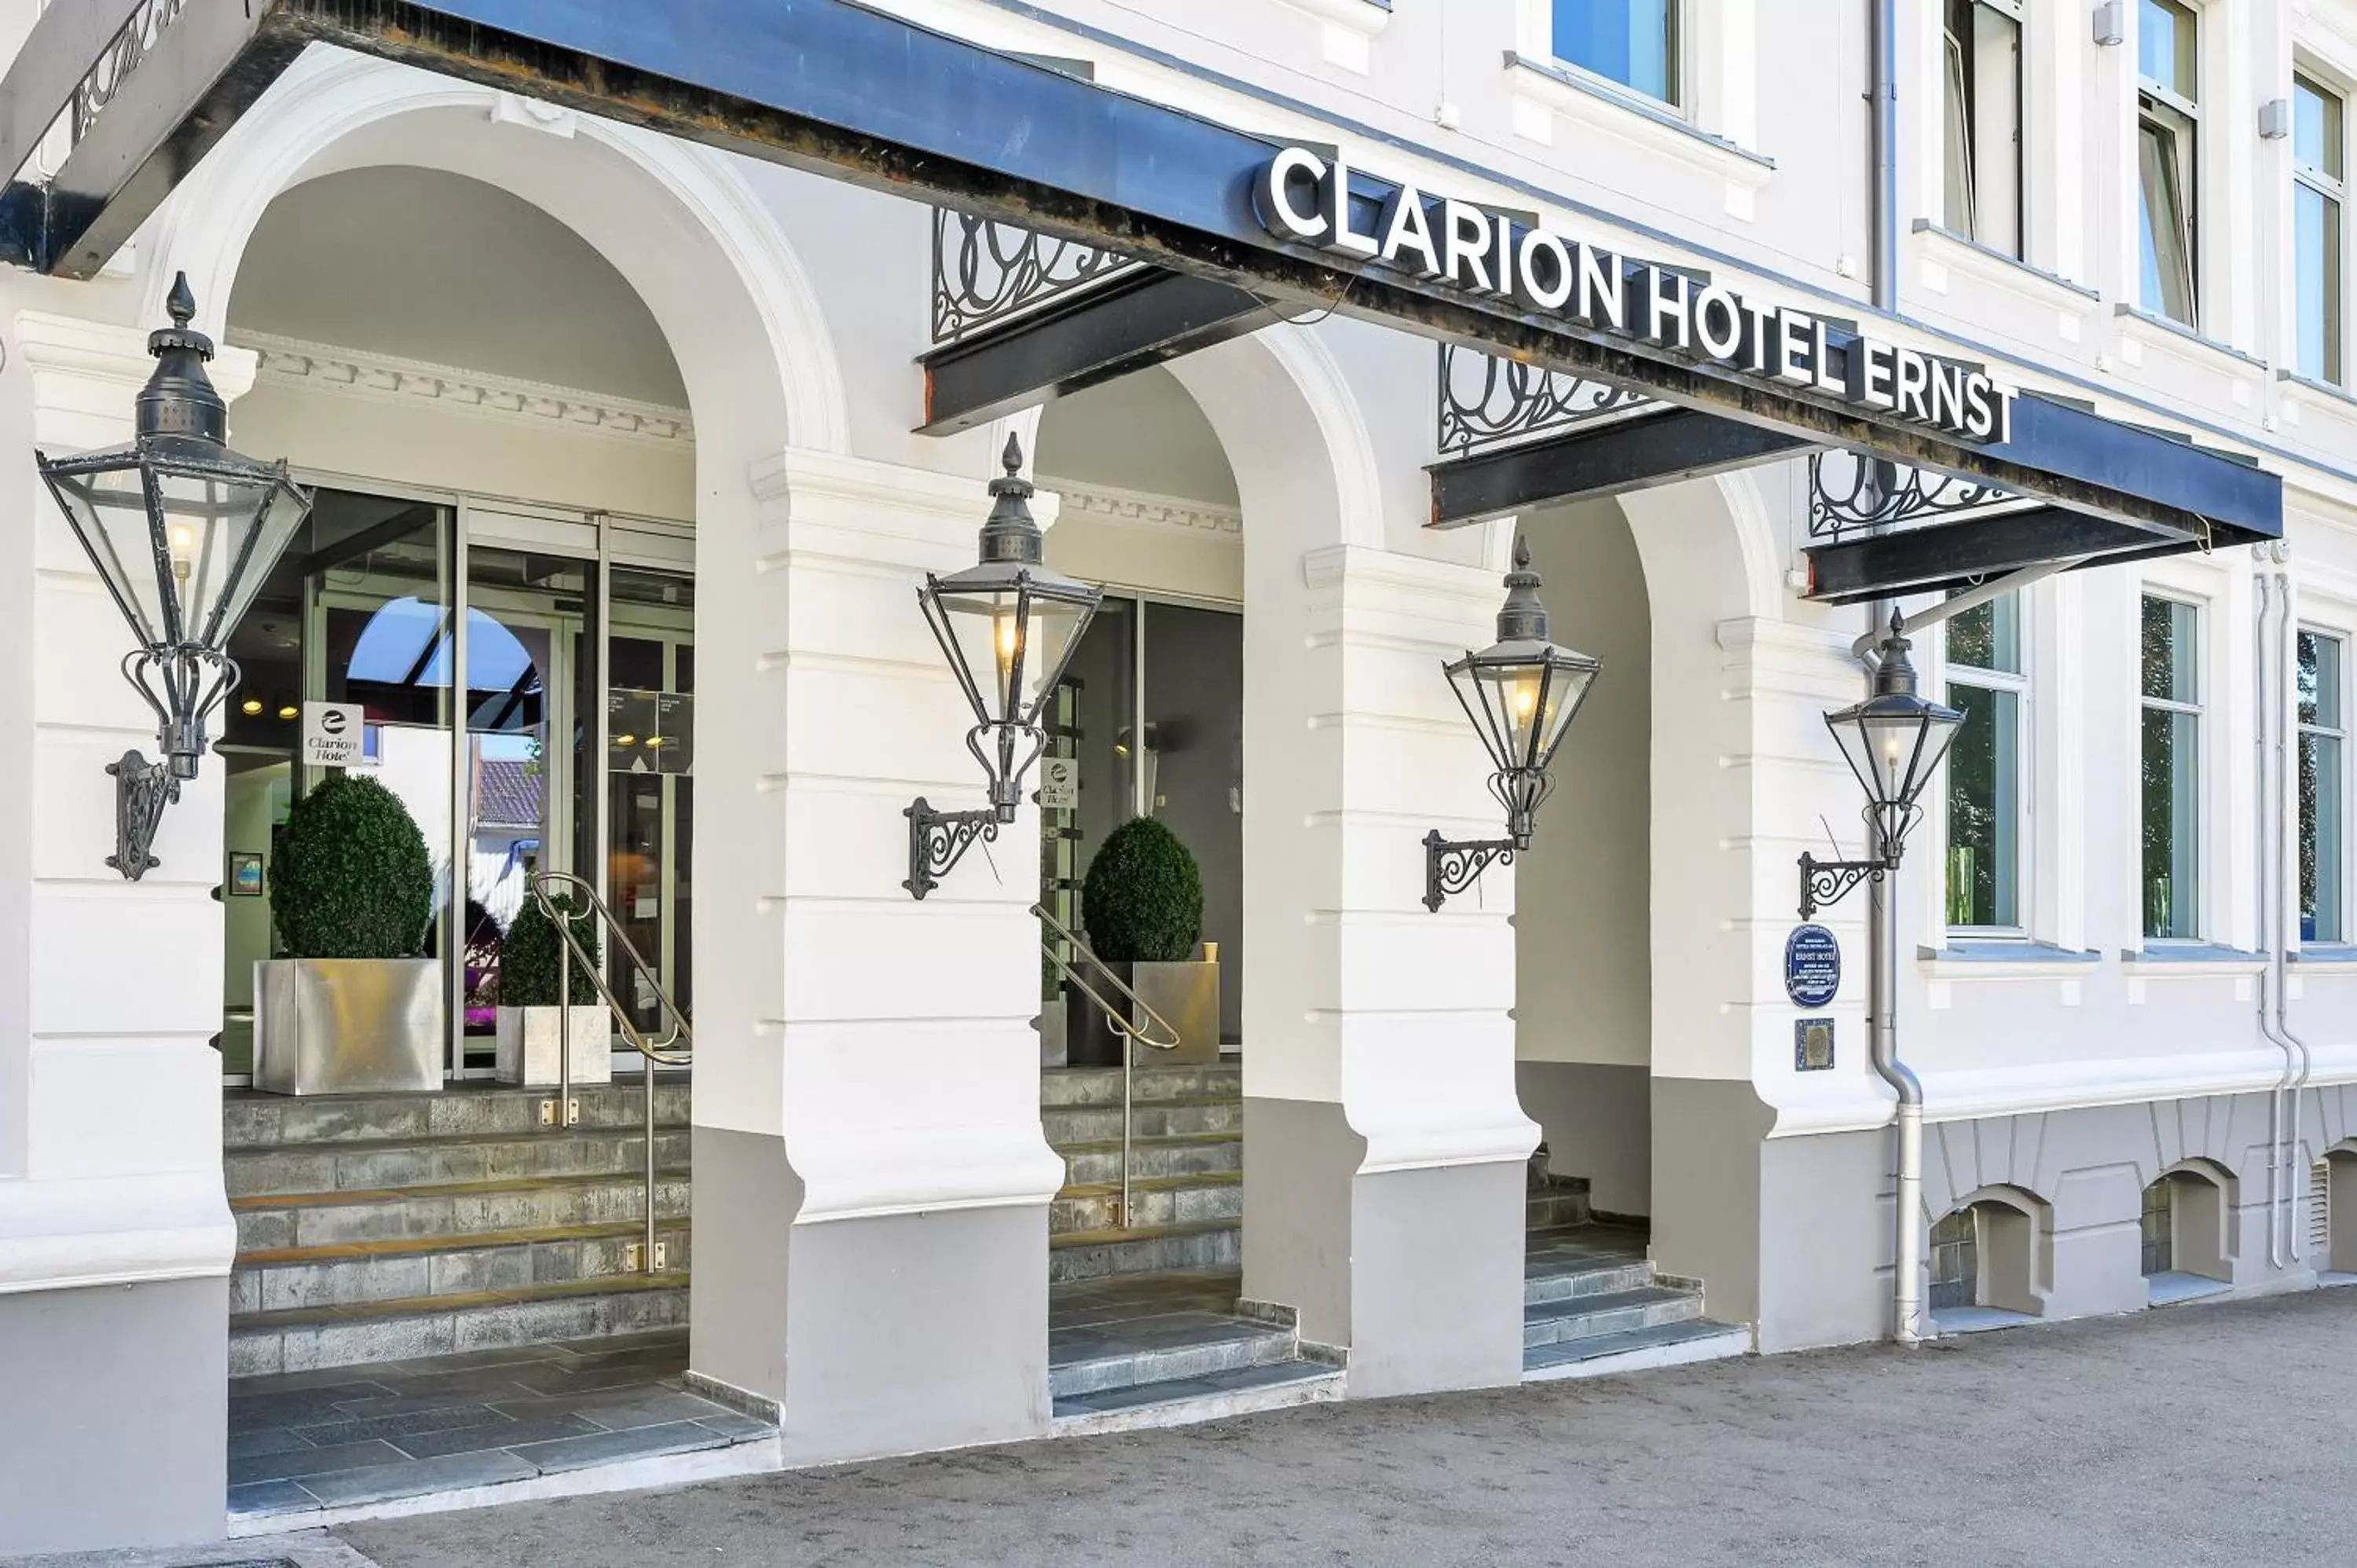 Property Building in Clarion Hotel Ernst